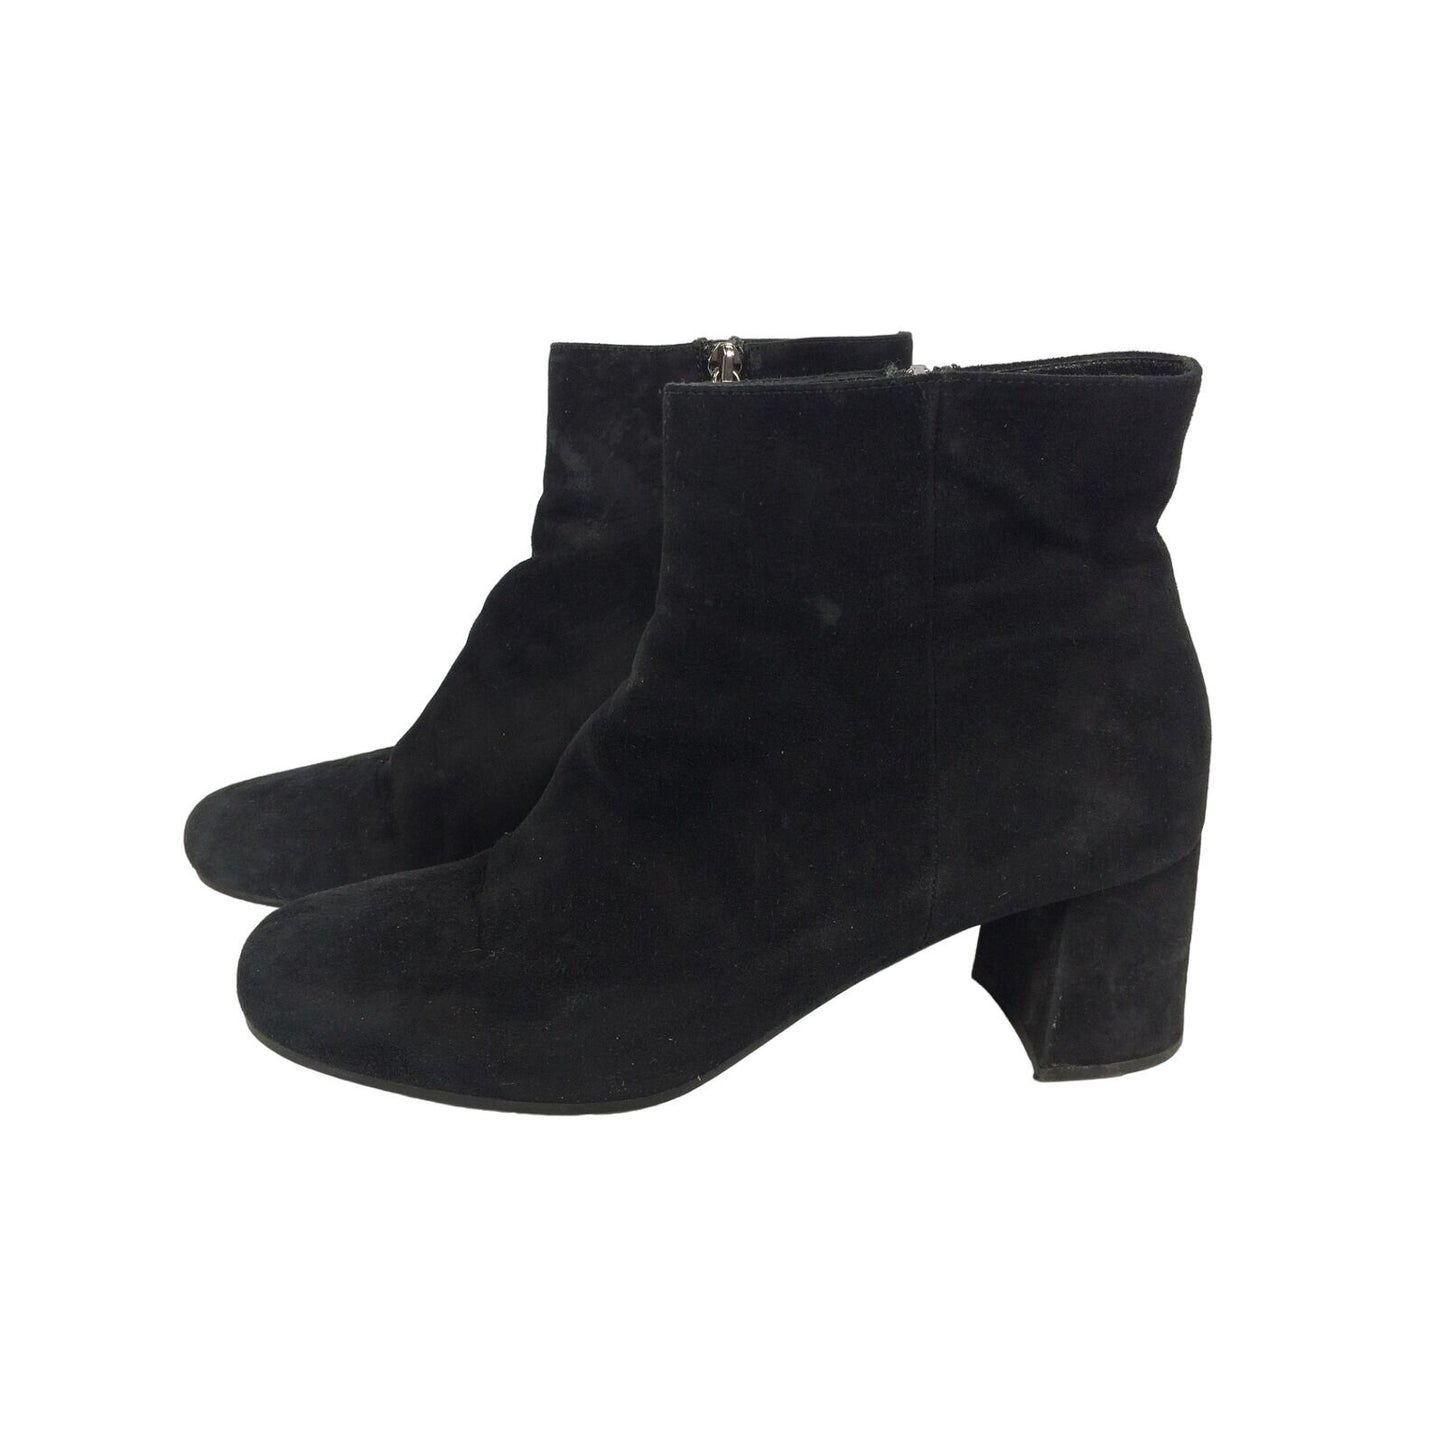 Prada black suede ankle boots